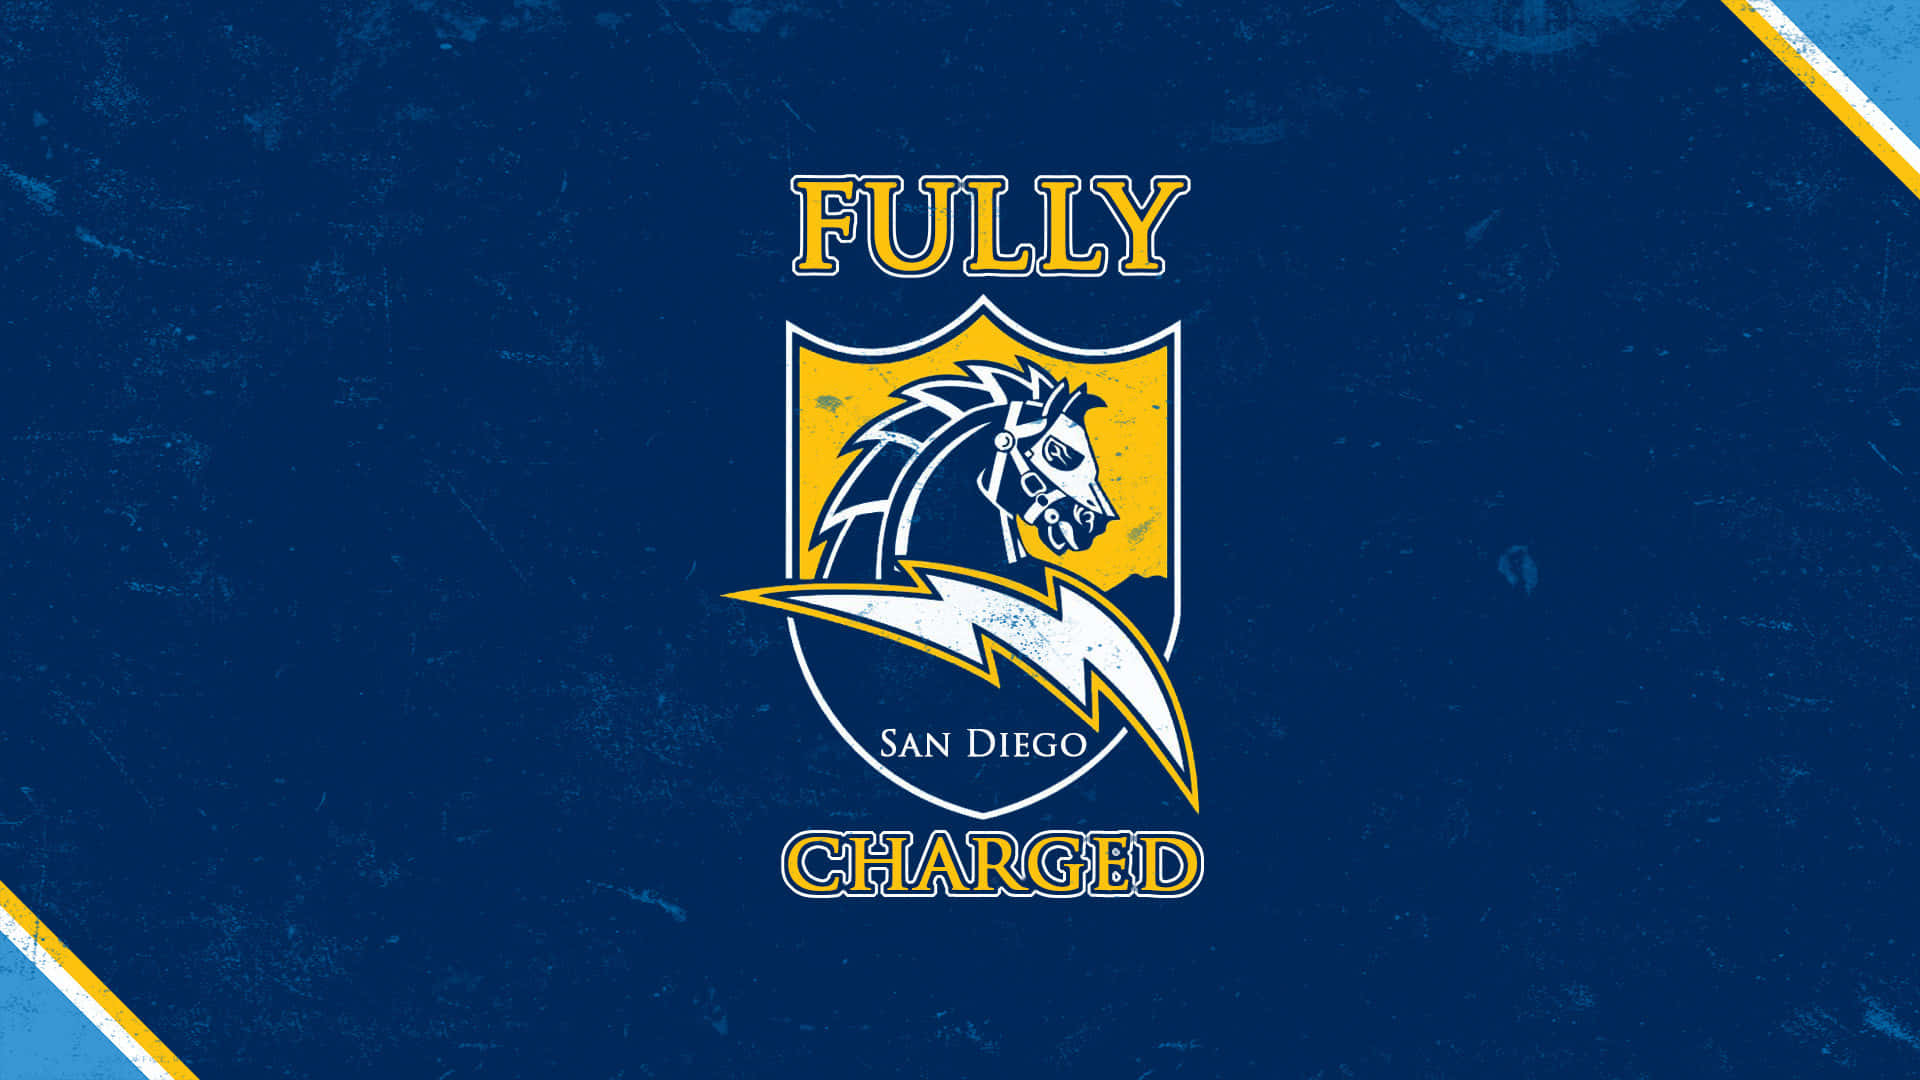 "Rooting for the Chargers!" Wallpaper